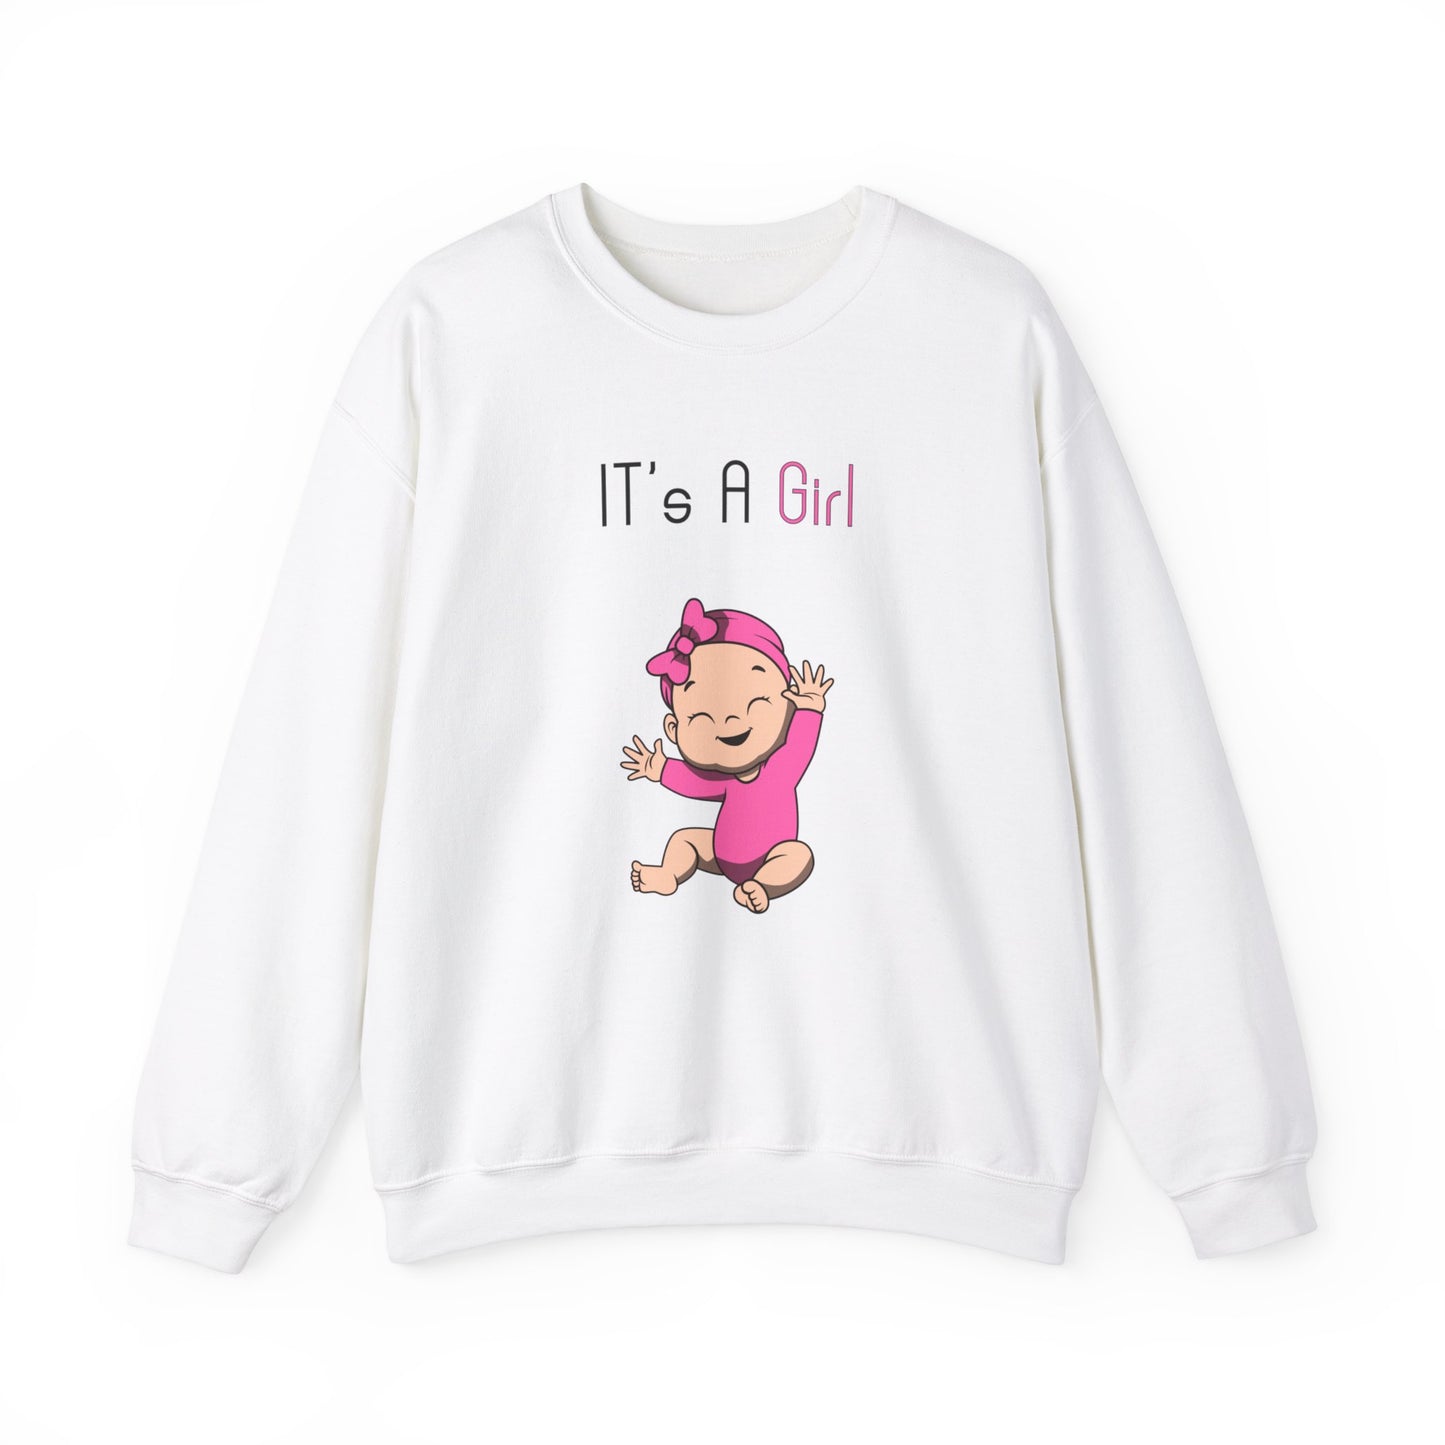 New Parent 'It's A Girl' Sweatshirt - Comfy Crewneck for Mom and Dad